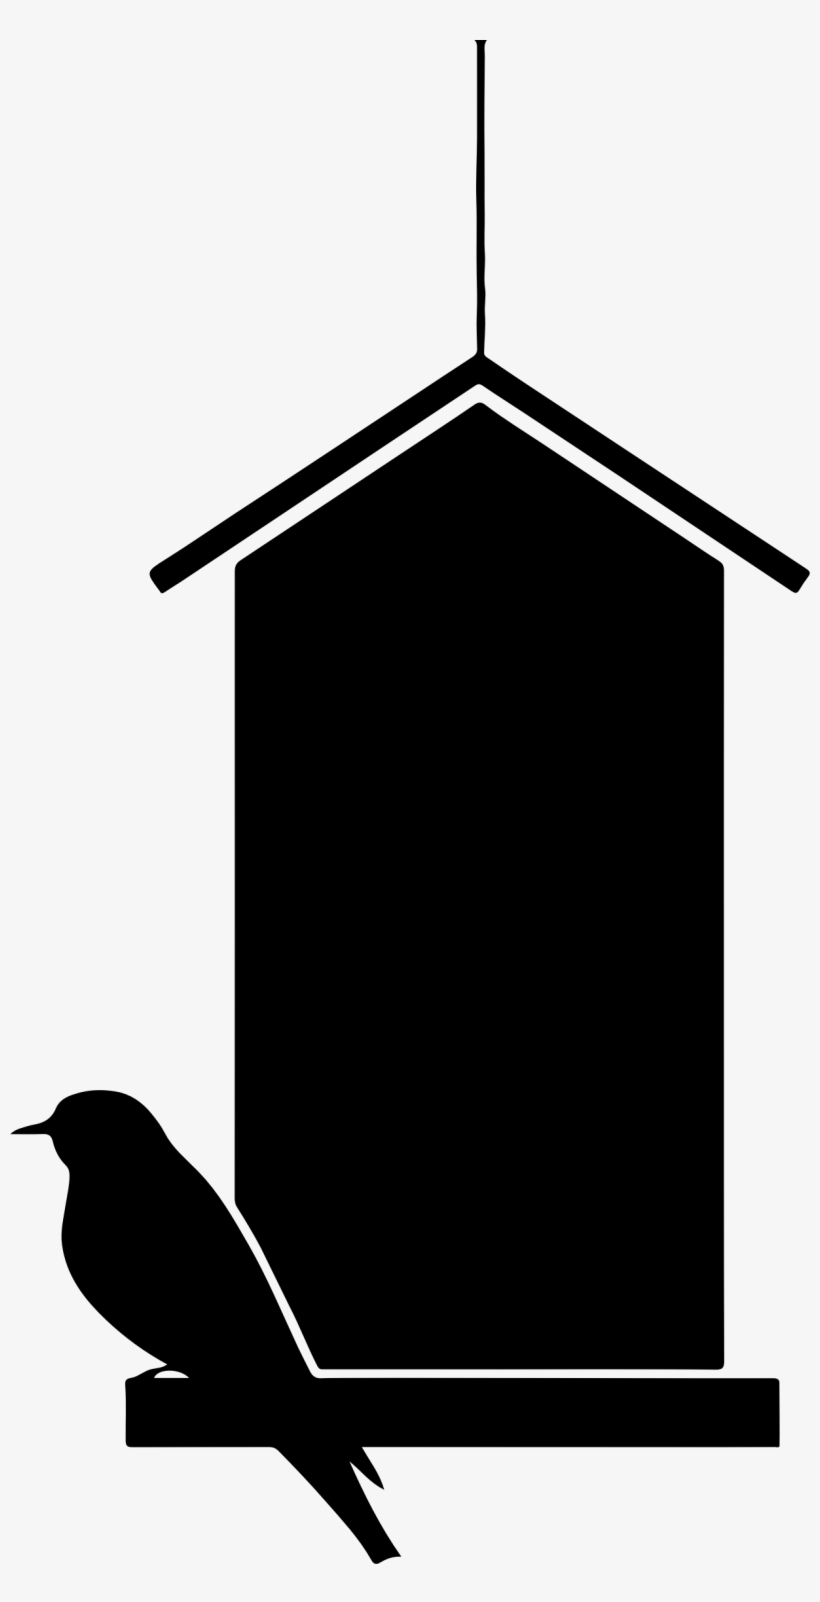 Bird House Silhouette Black And White - Bird Houses In Black And White, transparent png #953831